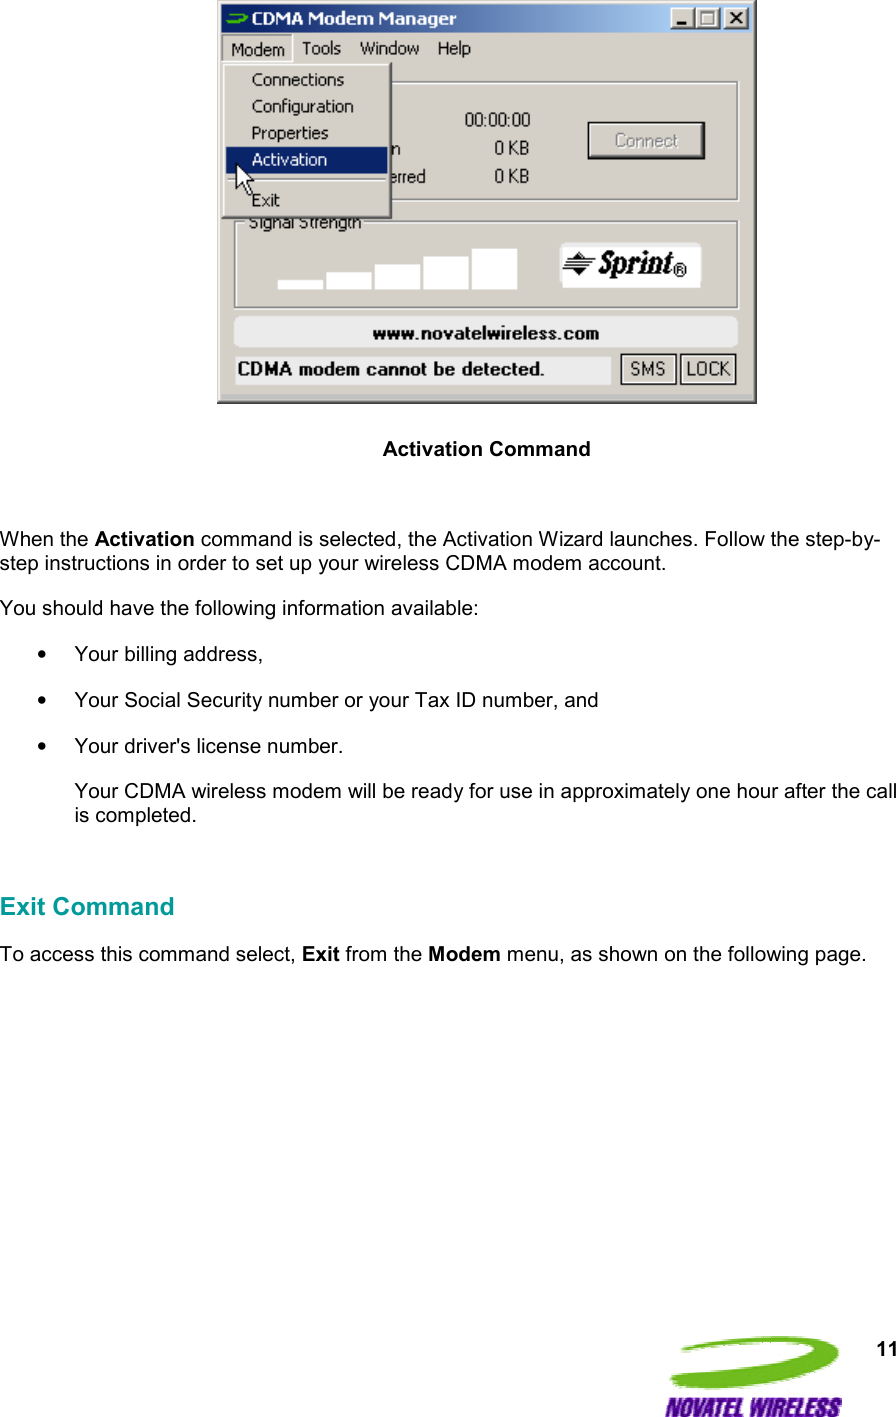  11   Activation Command  When the Activation command is selected, the Activation Wizard launches. Follow the step-by-step instructions in order to set up your wireless CDMA modem account.  You should have the following information available: •  Your billing address, •  Your Social Security number or your Tax ID number, and •  Your driver&apos;s license number. Your CDMA wireless modem will be ready for use in approximately one hour after the call is completed.  Exit Command To access this command select, Exit from the Modem menu, as shown on the following page.  